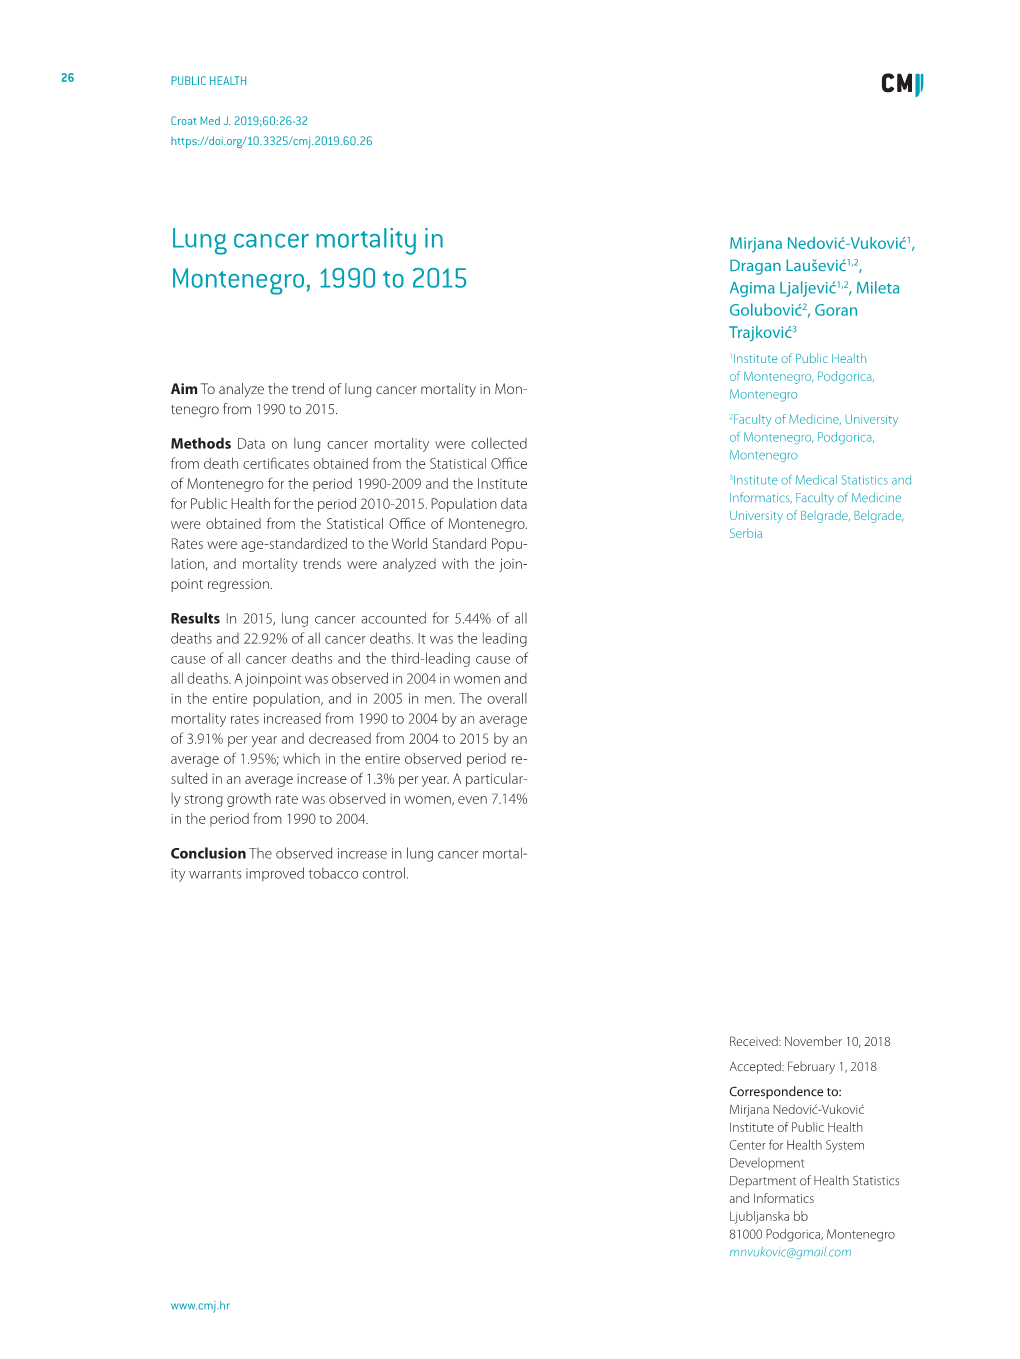 Lung Cancer Mortality in Montenegro, 1990 to 2015